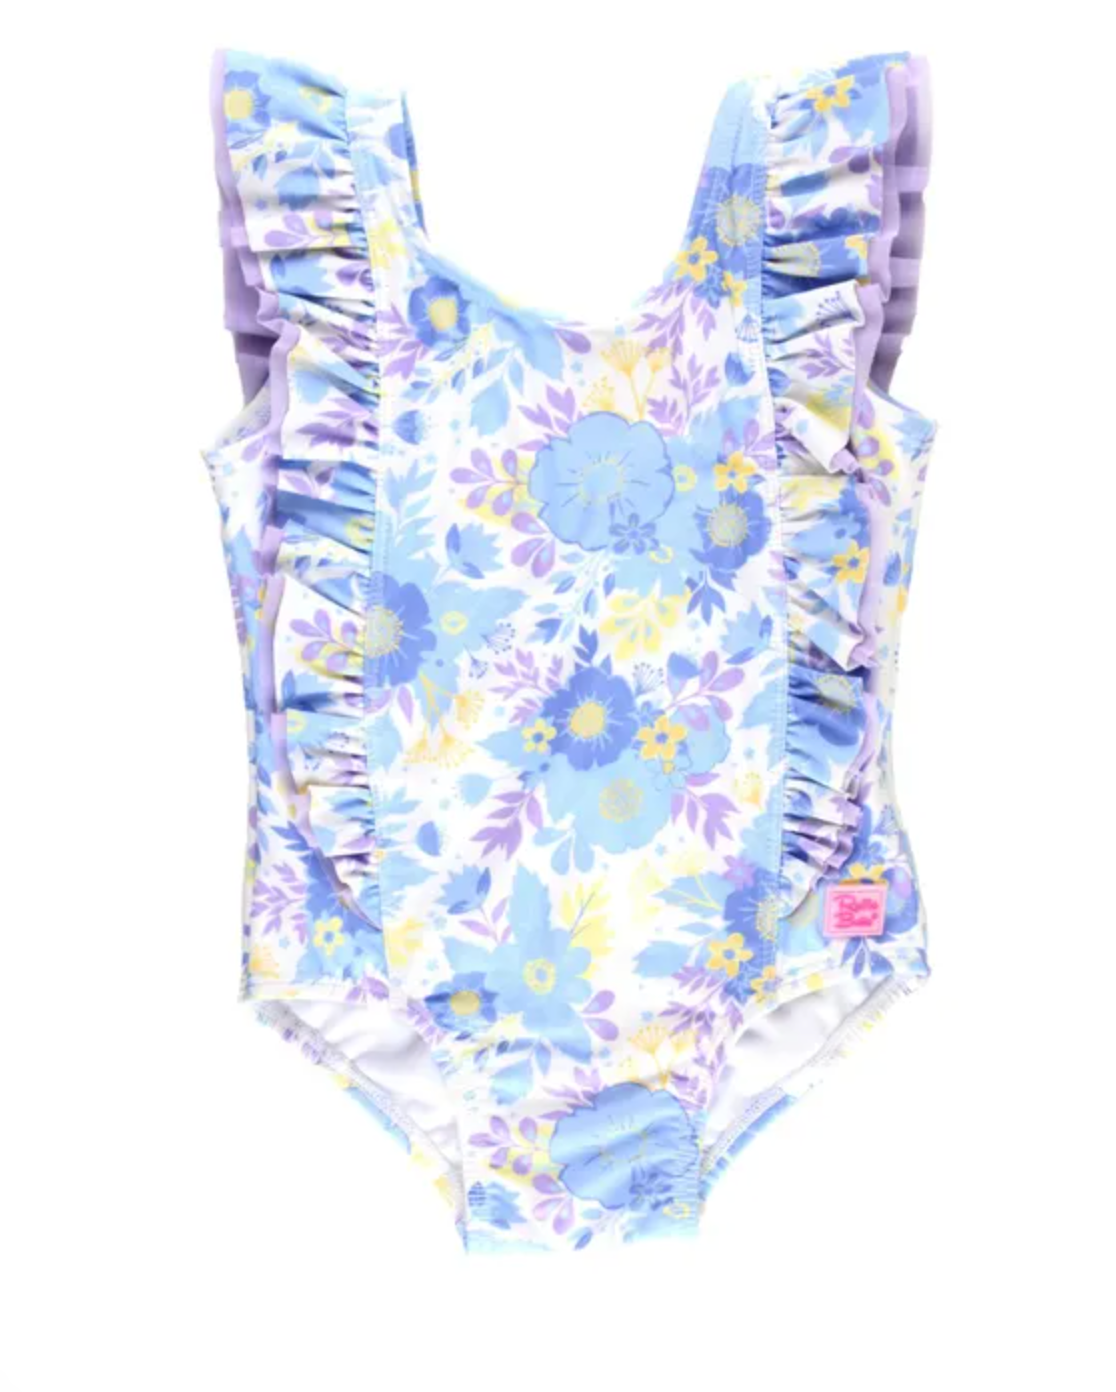 Pristine Blooms Waterfall One Piece